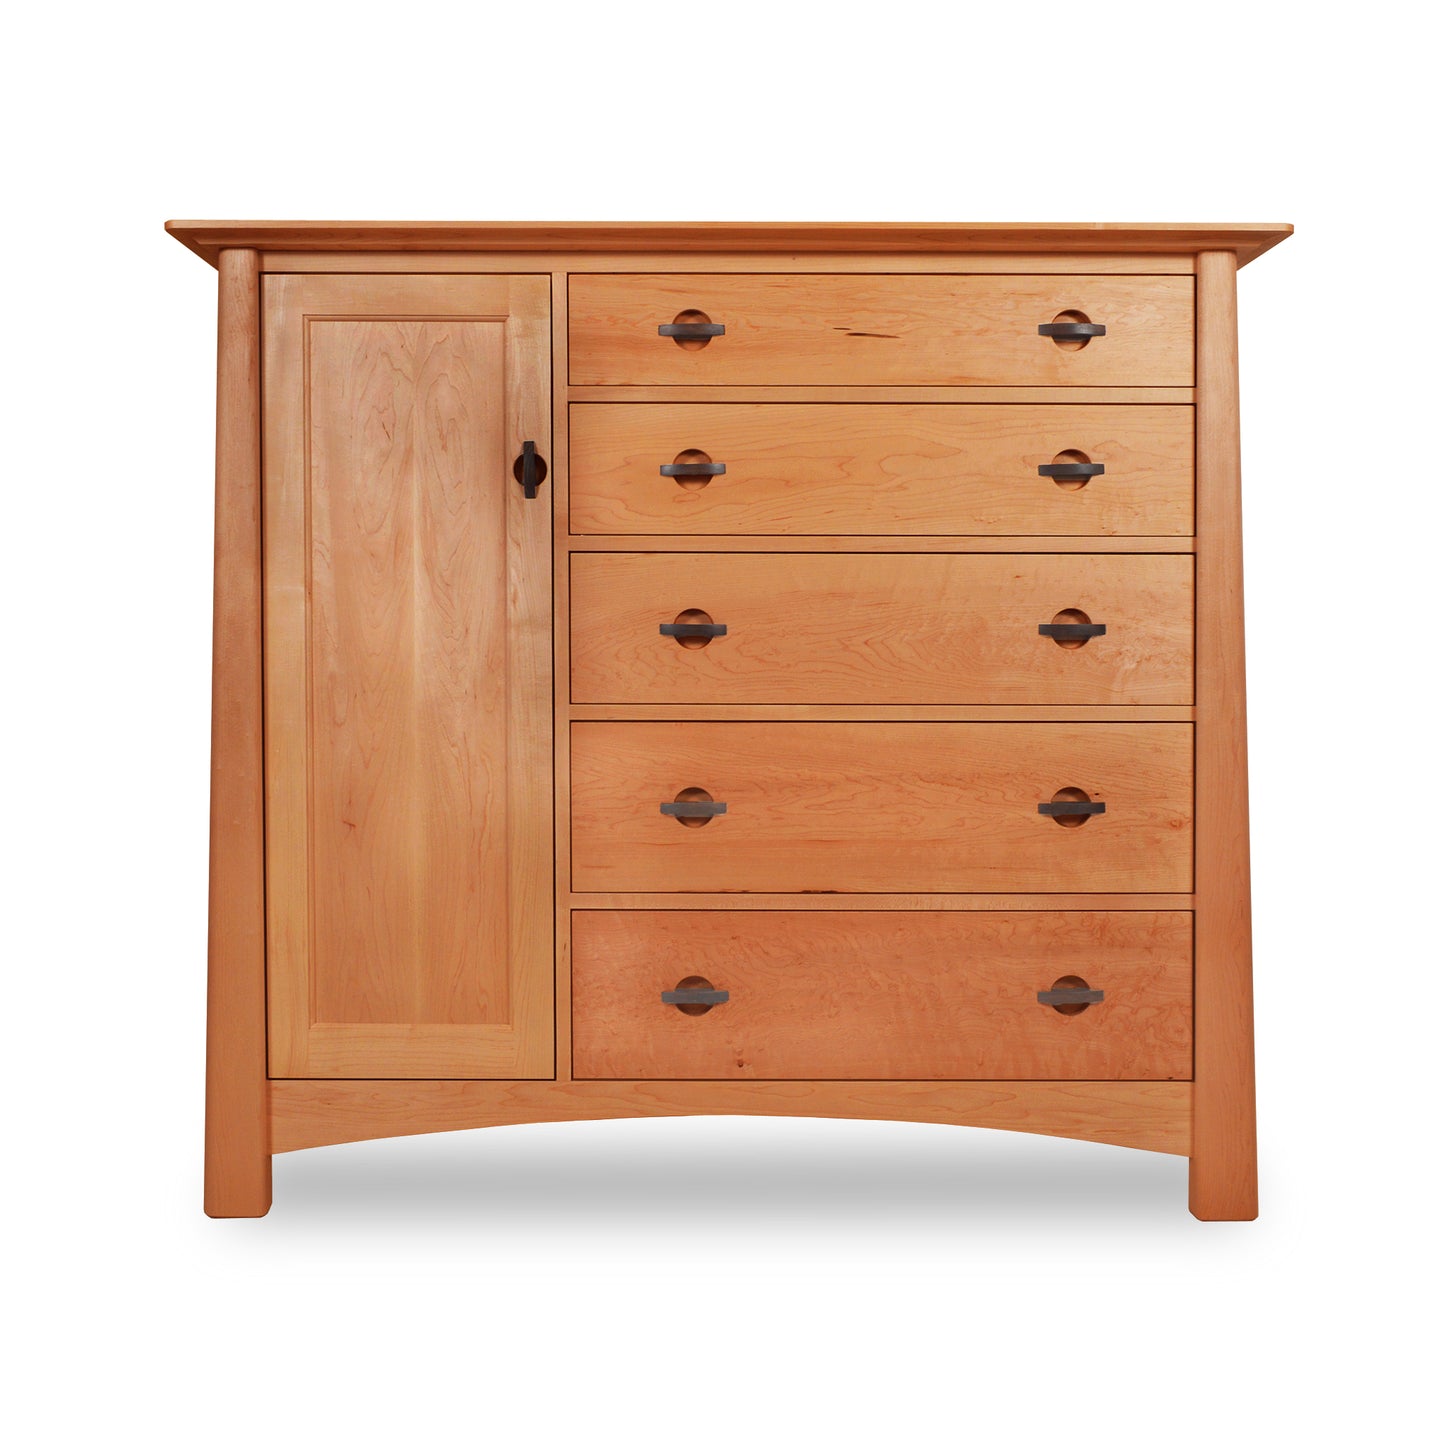 A Maple Corner Woodworks' Cherry Moon Gent's Chest with an eco-friendly oil finish and two drawers.